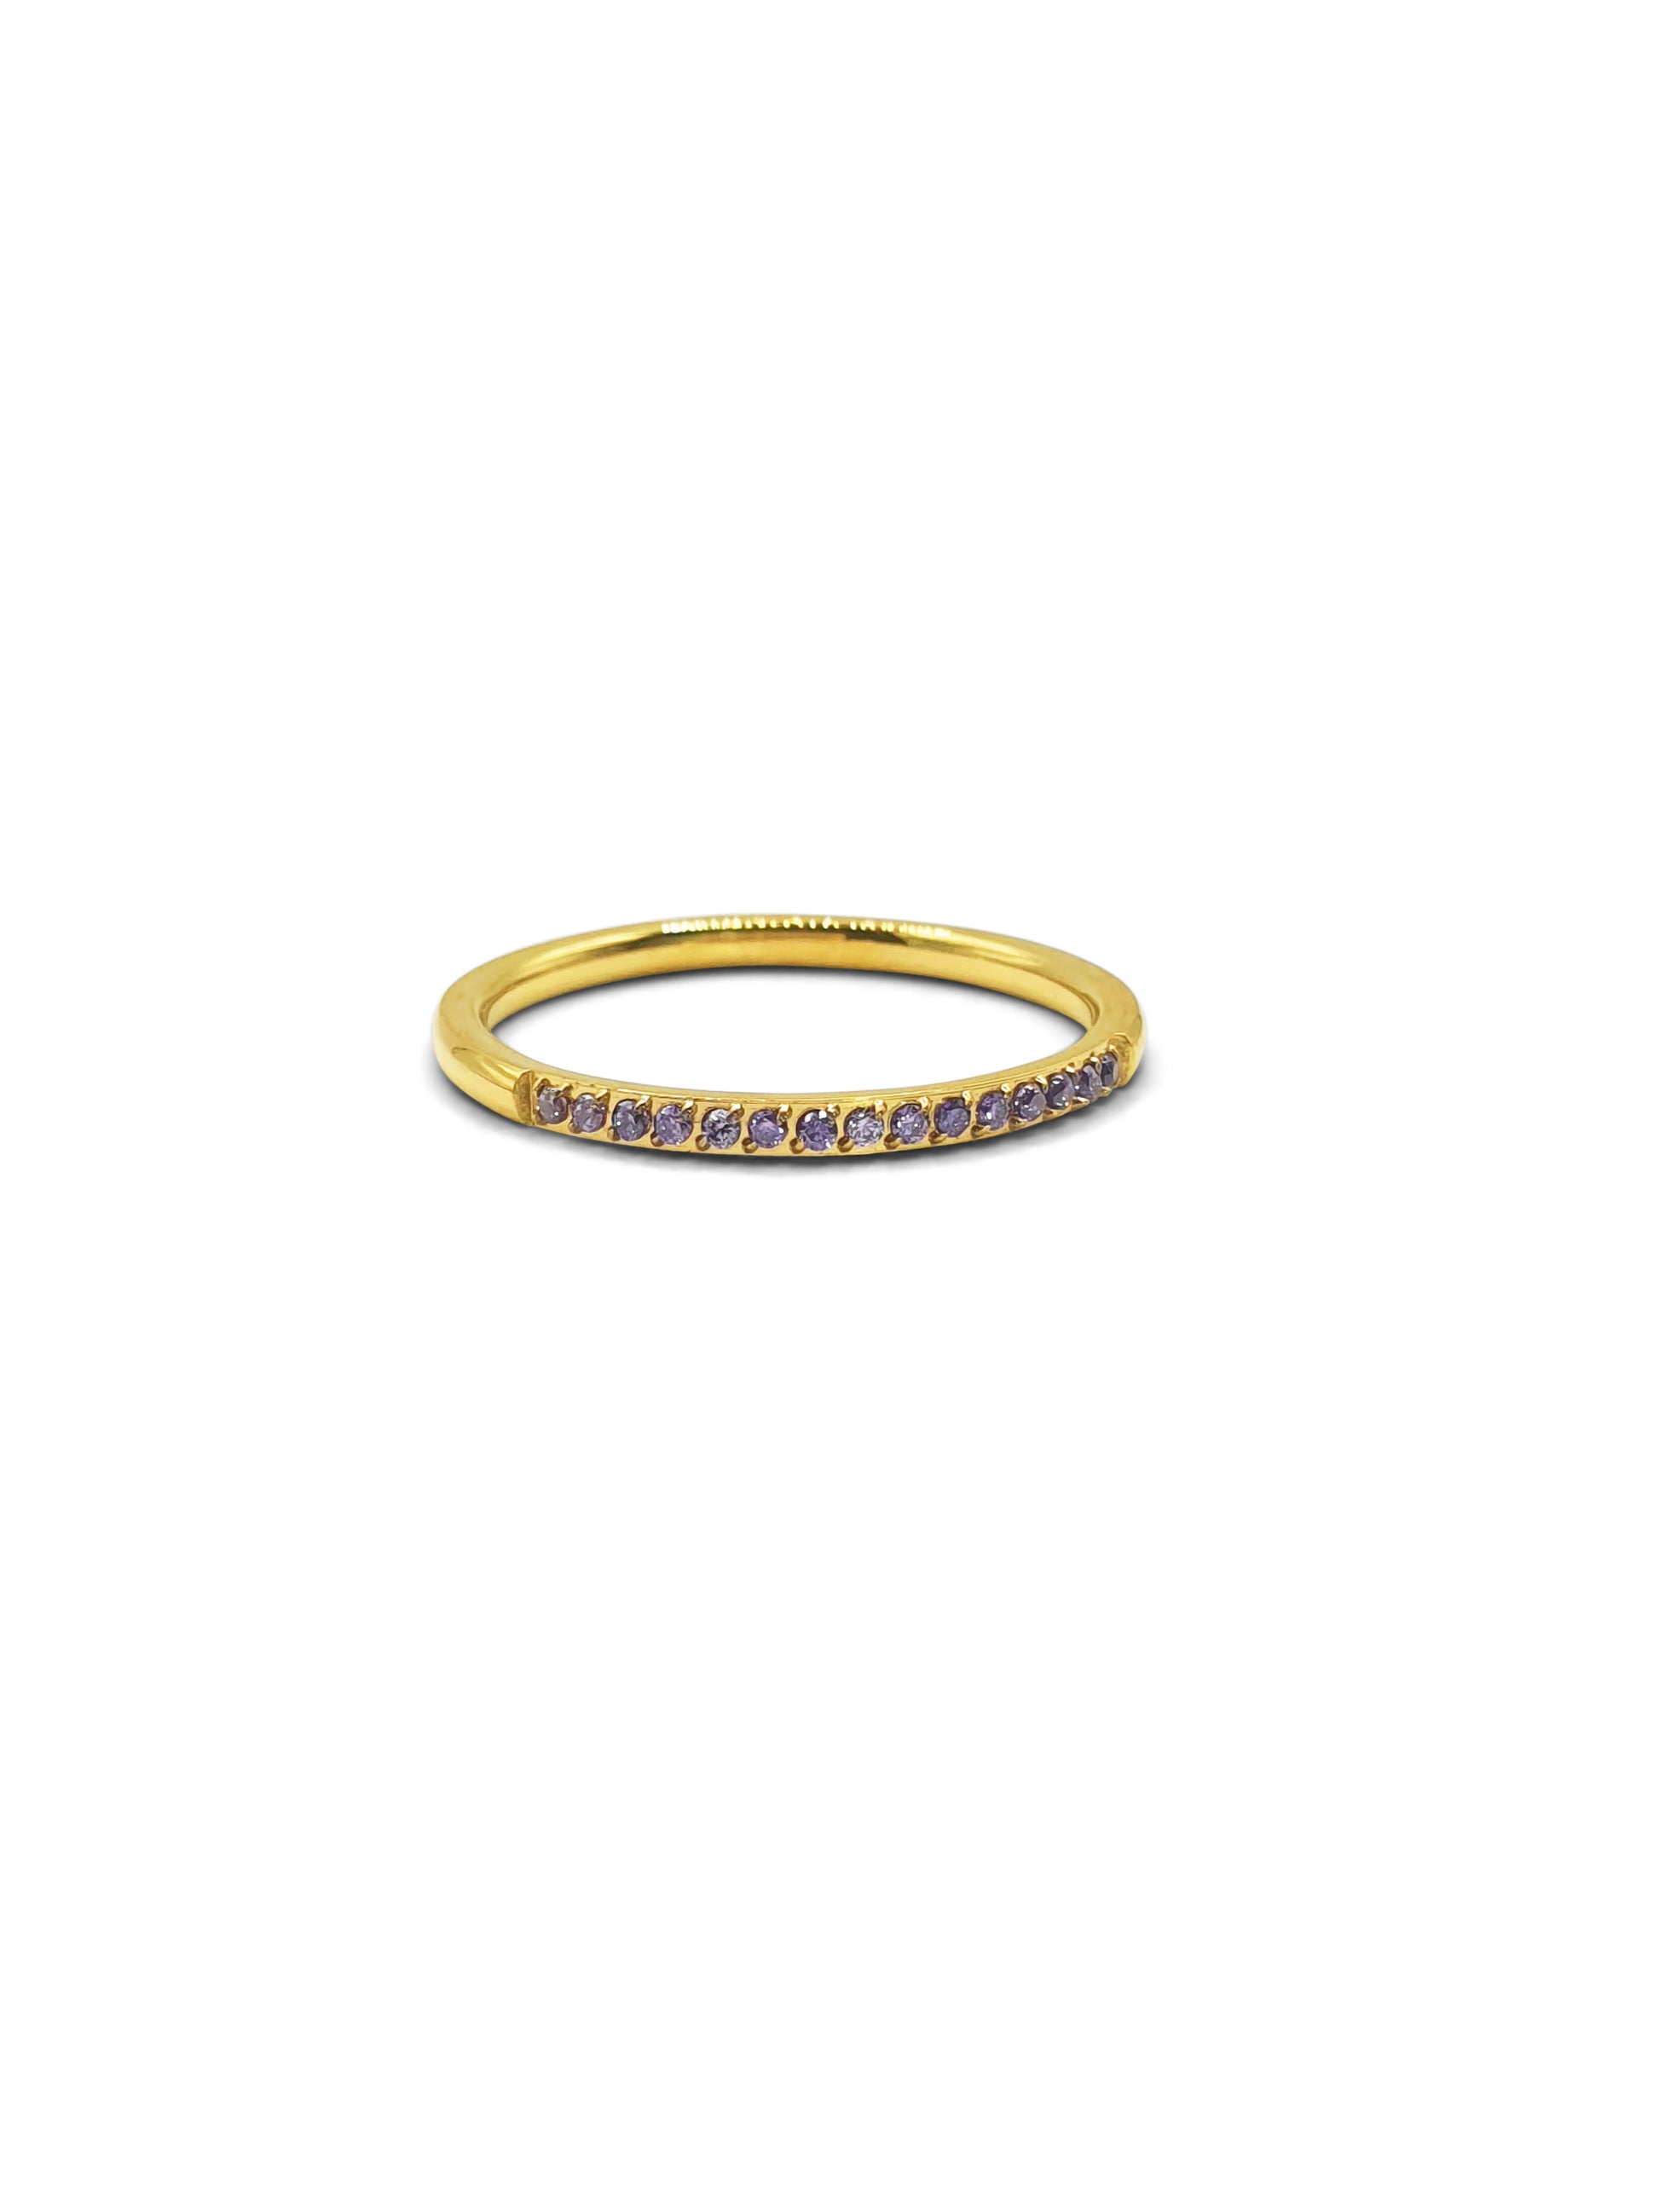 A gold stackable band ring set at the top with small purple gems